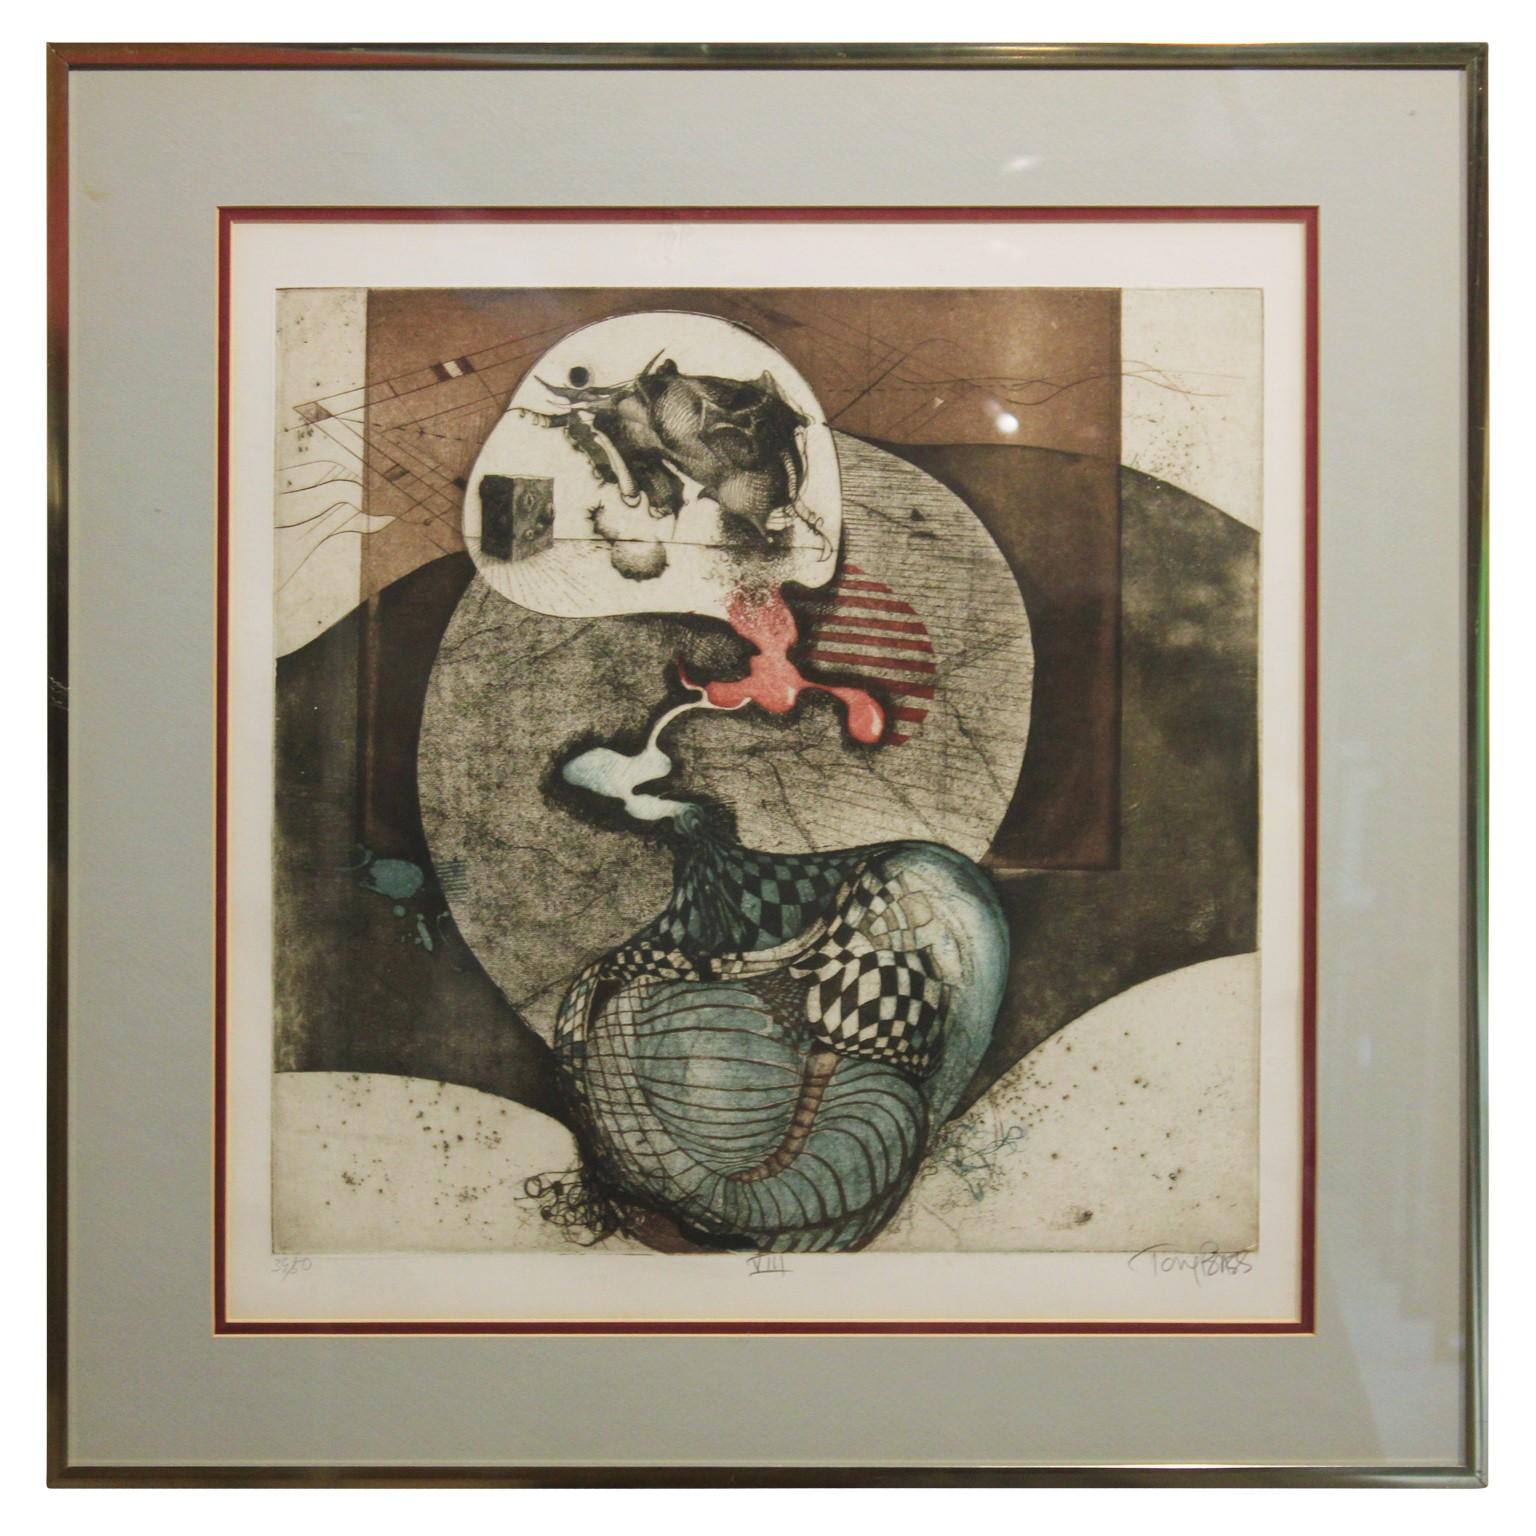 Tony Bass Abstract Print - "VIII" Abstract Surrealist Lithograph, Edition 39 of 50